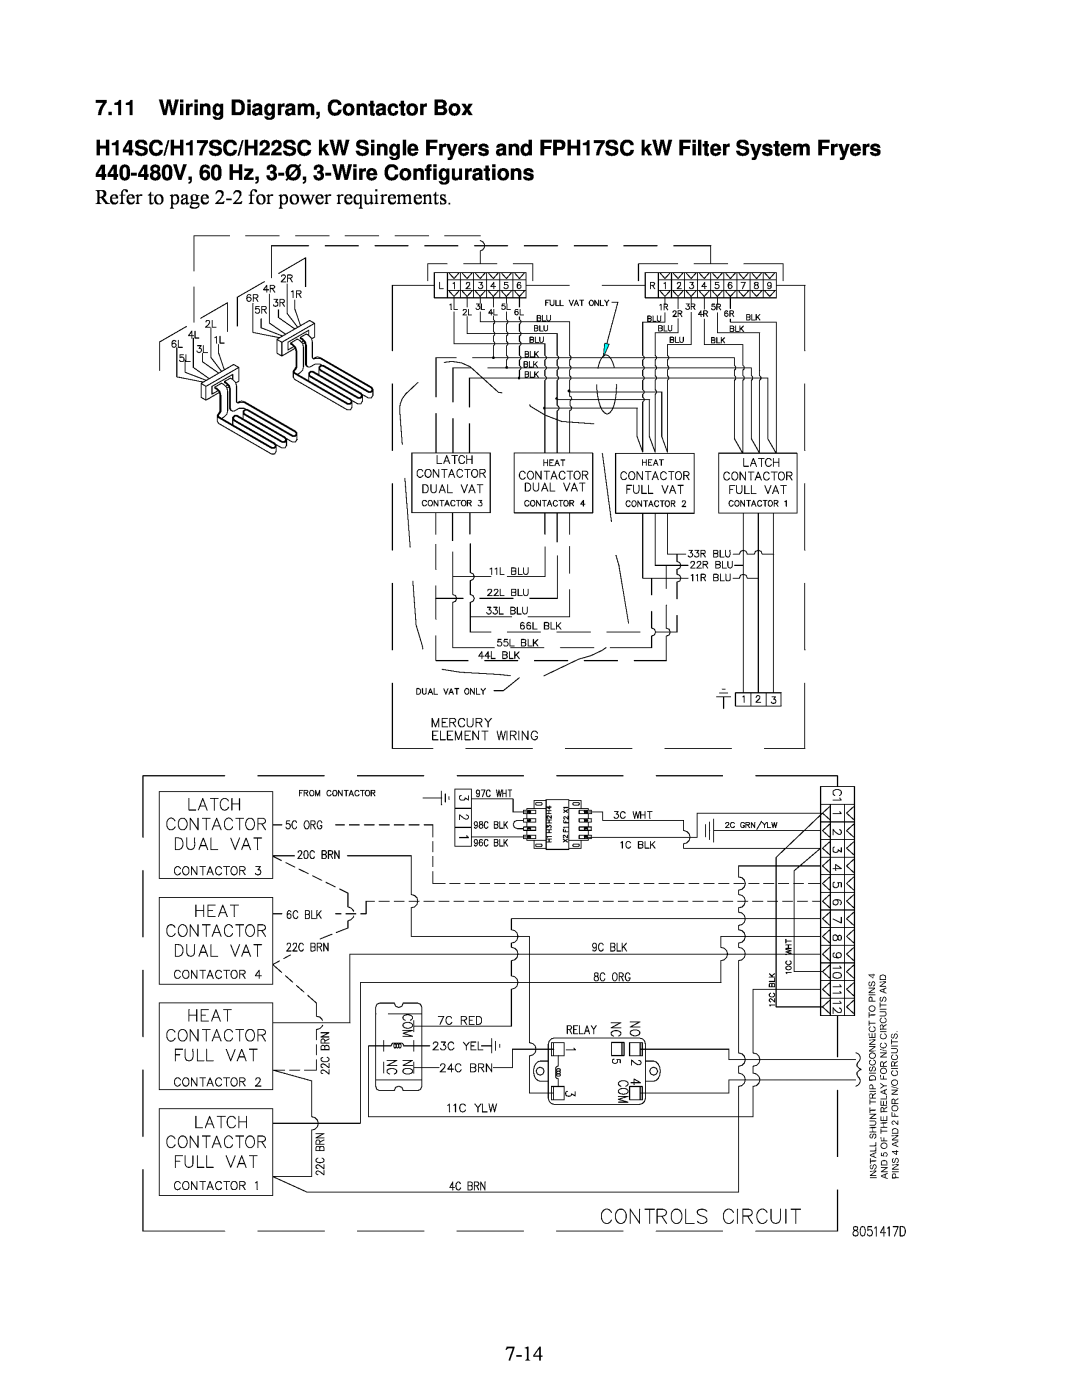 Frymaster H14SC, H17SC, H22SC manual Wiring Diagram, Contactor Box, Refer to page 2-2 for power requirements, 7-14 